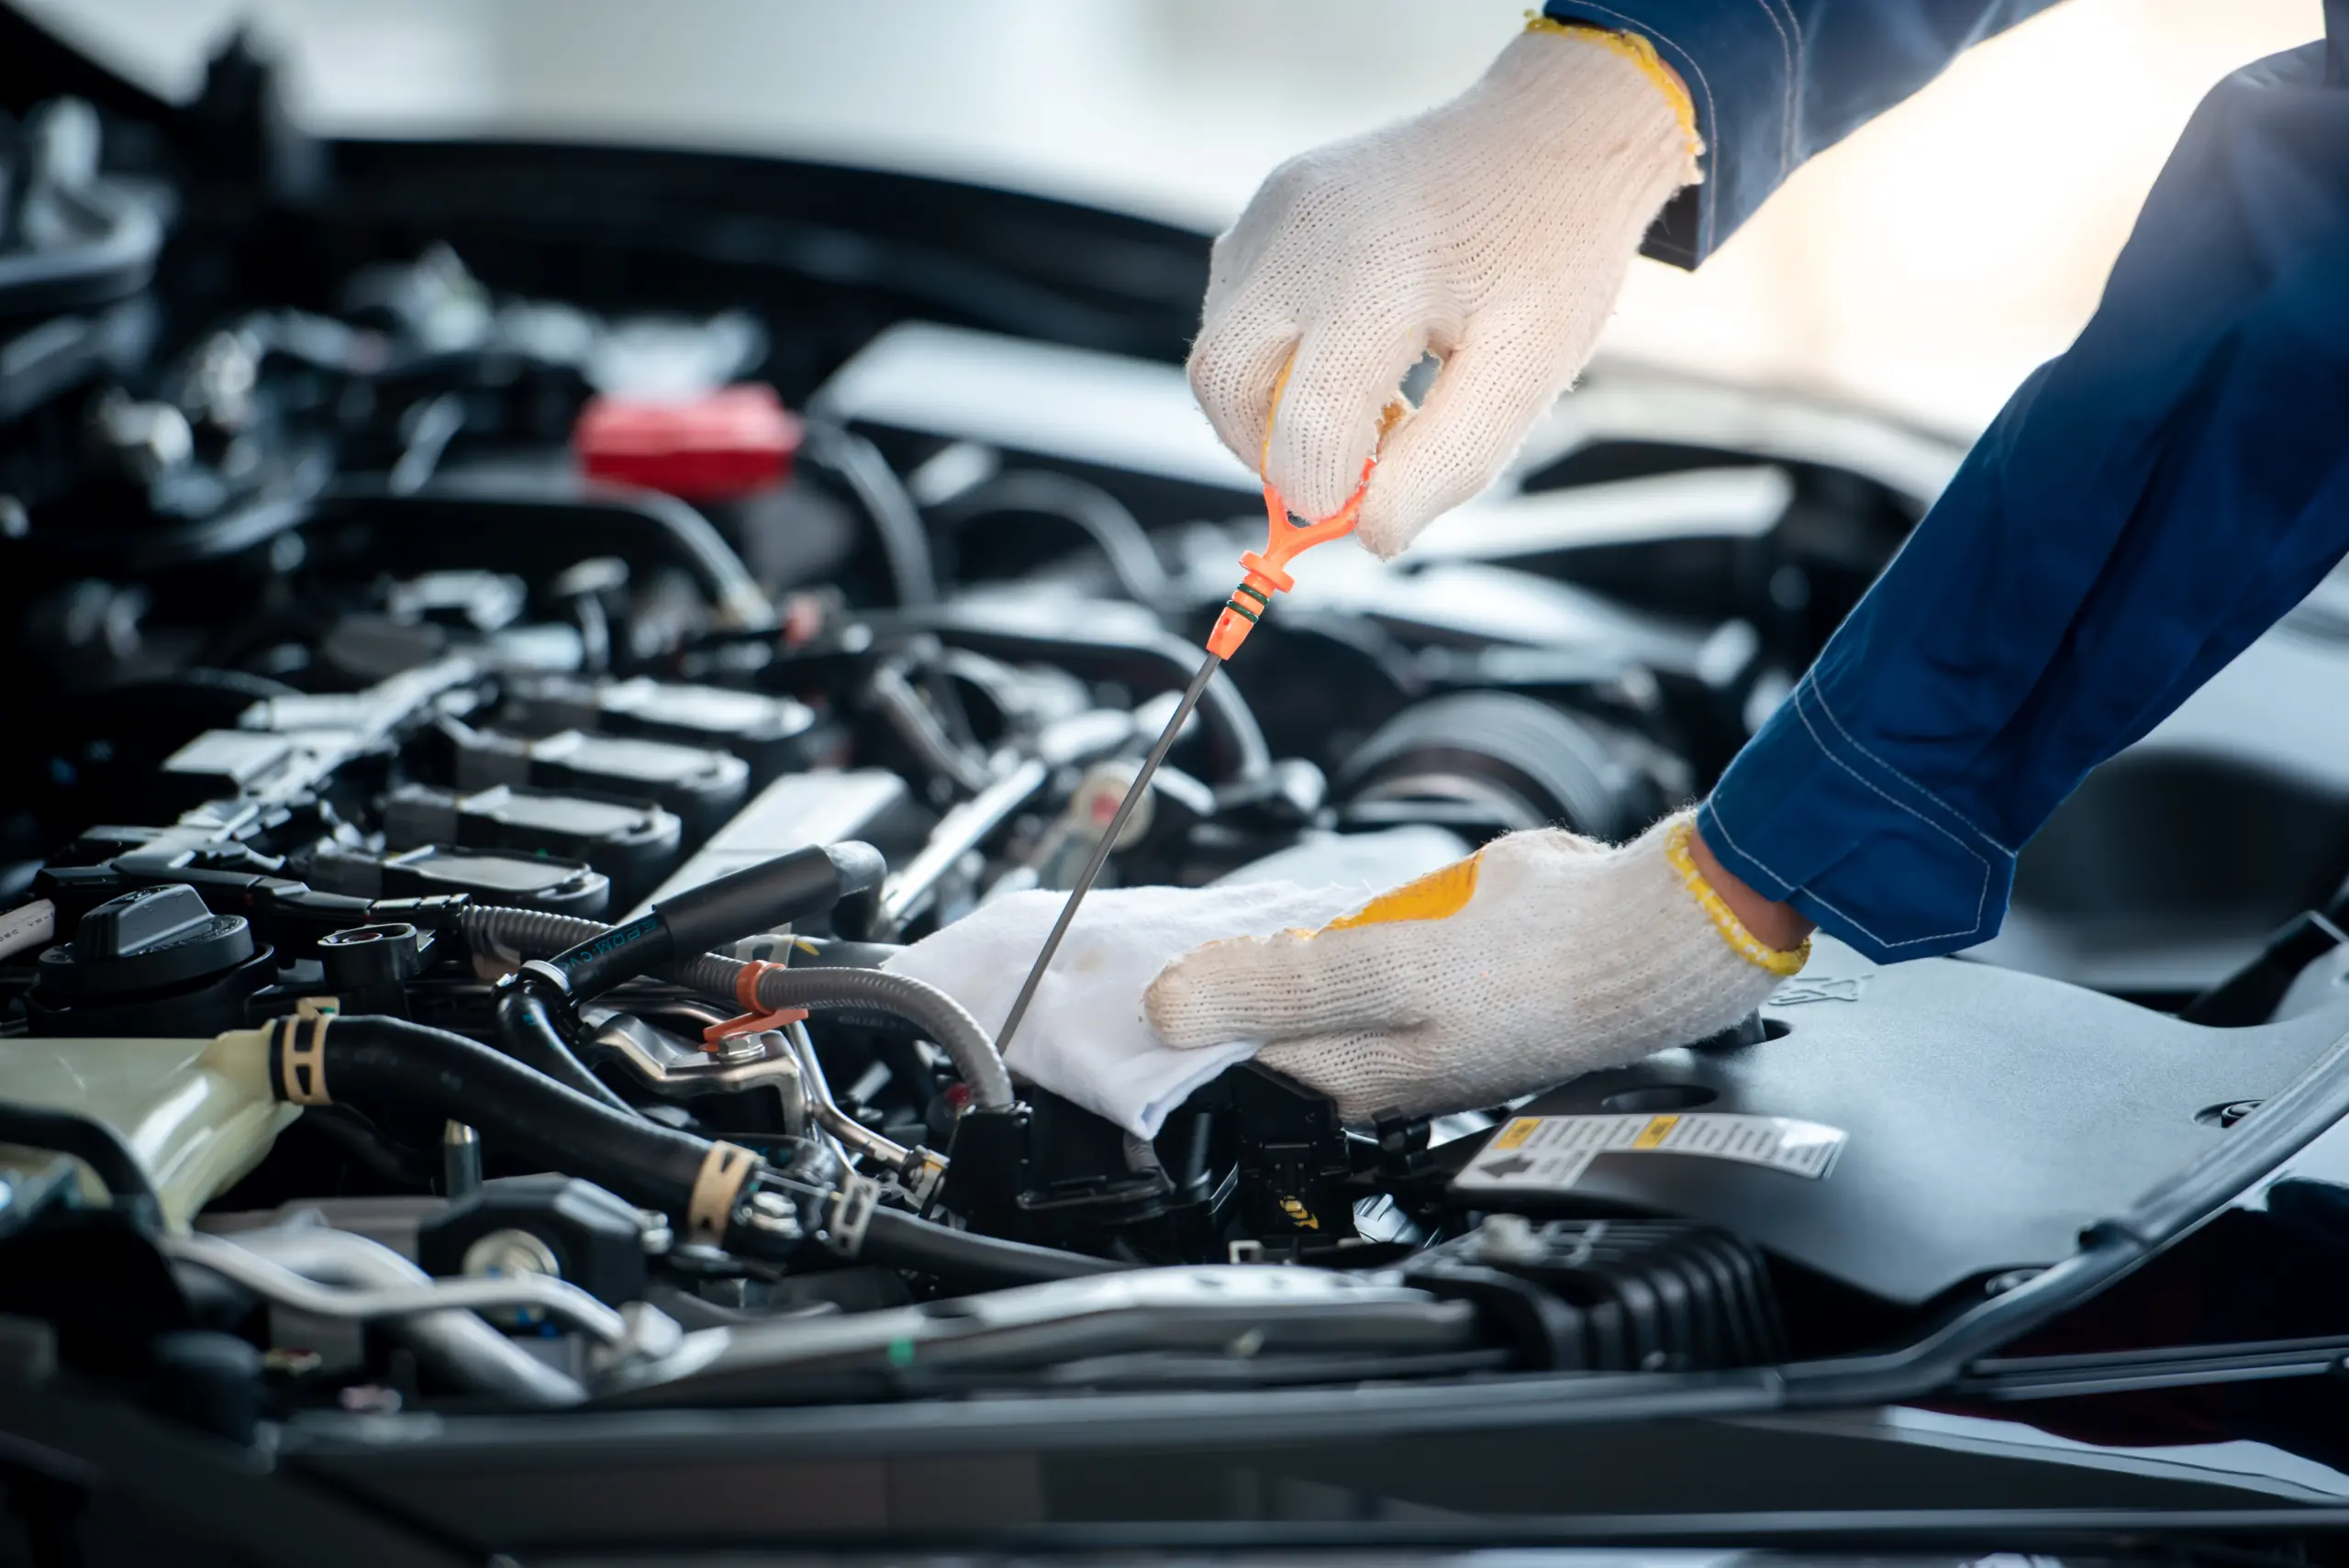 Engine inspection on a company or personal vehicle in a garage.